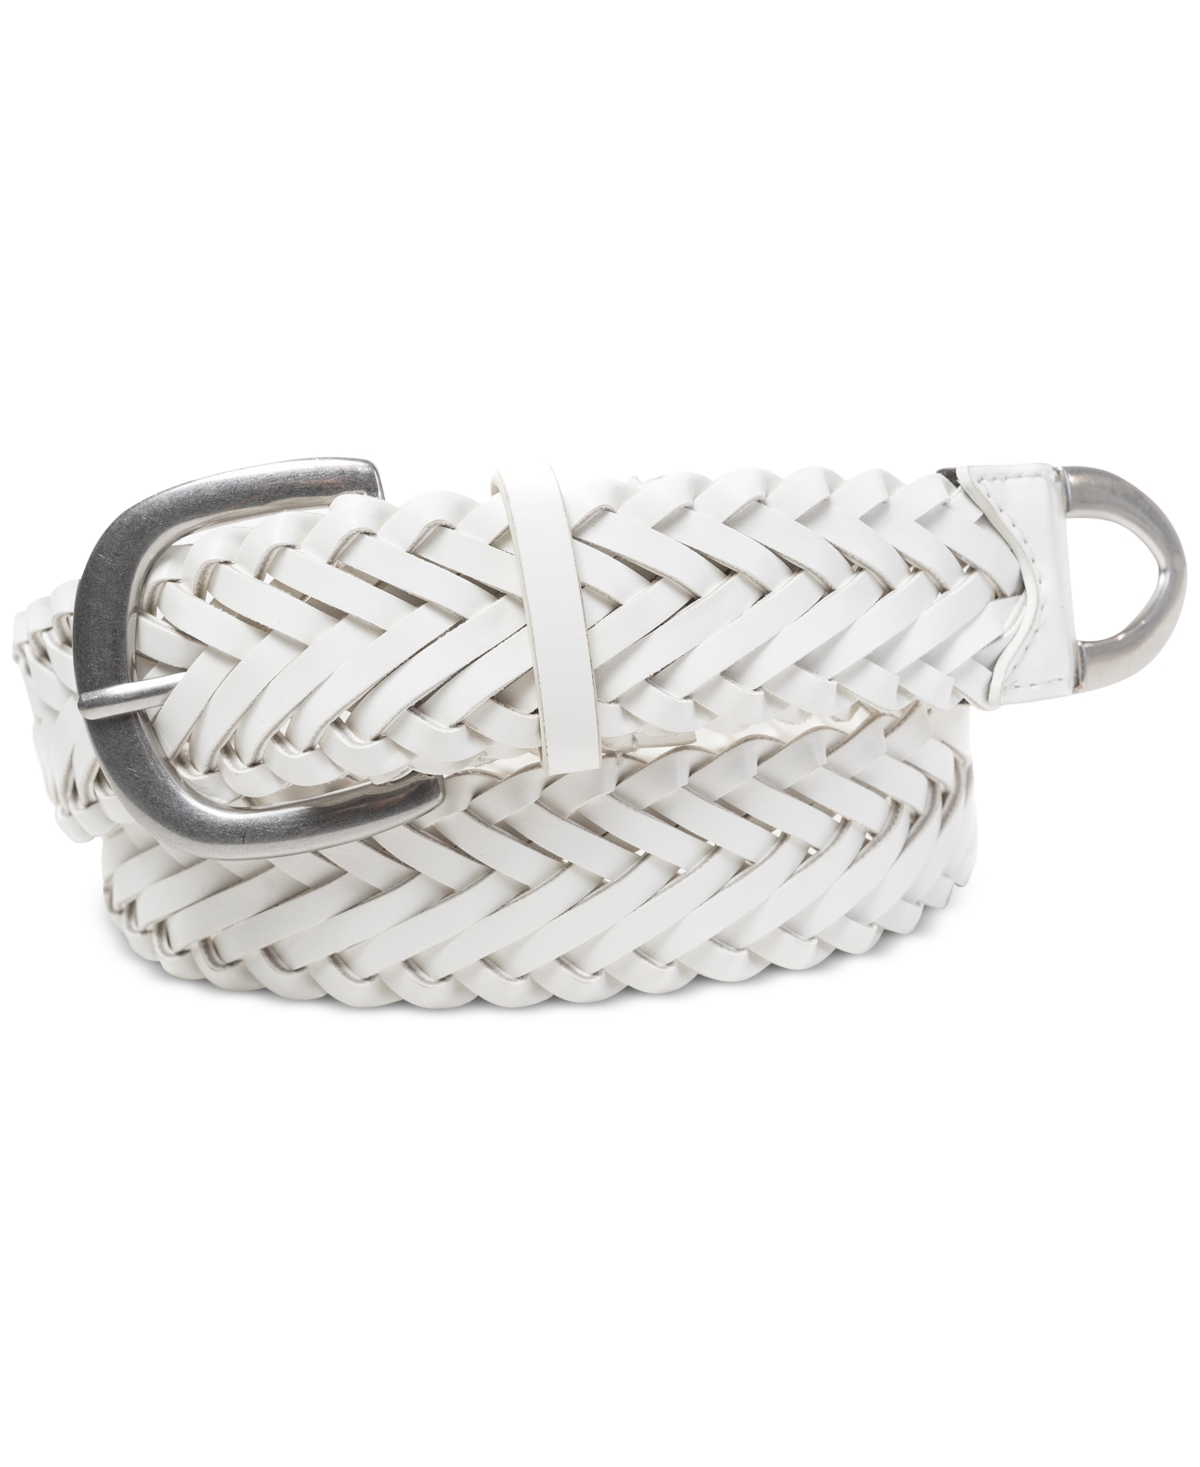 Braided Belt with Metal Buckle - White